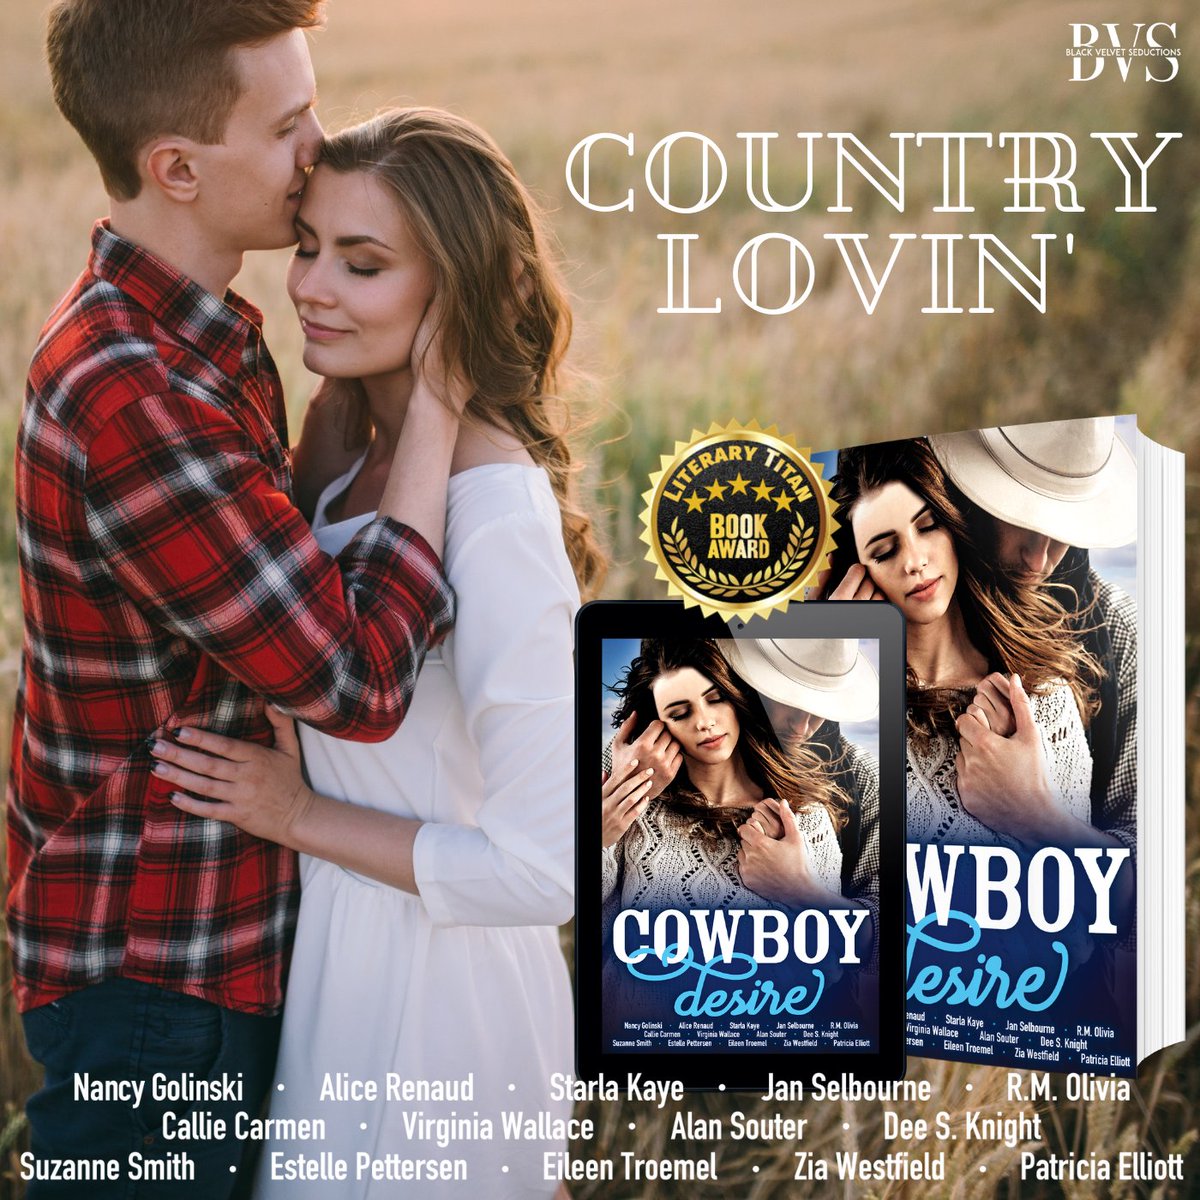 Bring home this award-winning anthology full of beautiful & sometimes spicy love stories. Enjoy!  
Get your copy here amzn.to/2LmdUhD 
#cowboy #cowboyromance #Romance #romancebooks #country #westernromance #western #spacecowboy #Thursday #ThursdayThoughts #KindleUnlimited